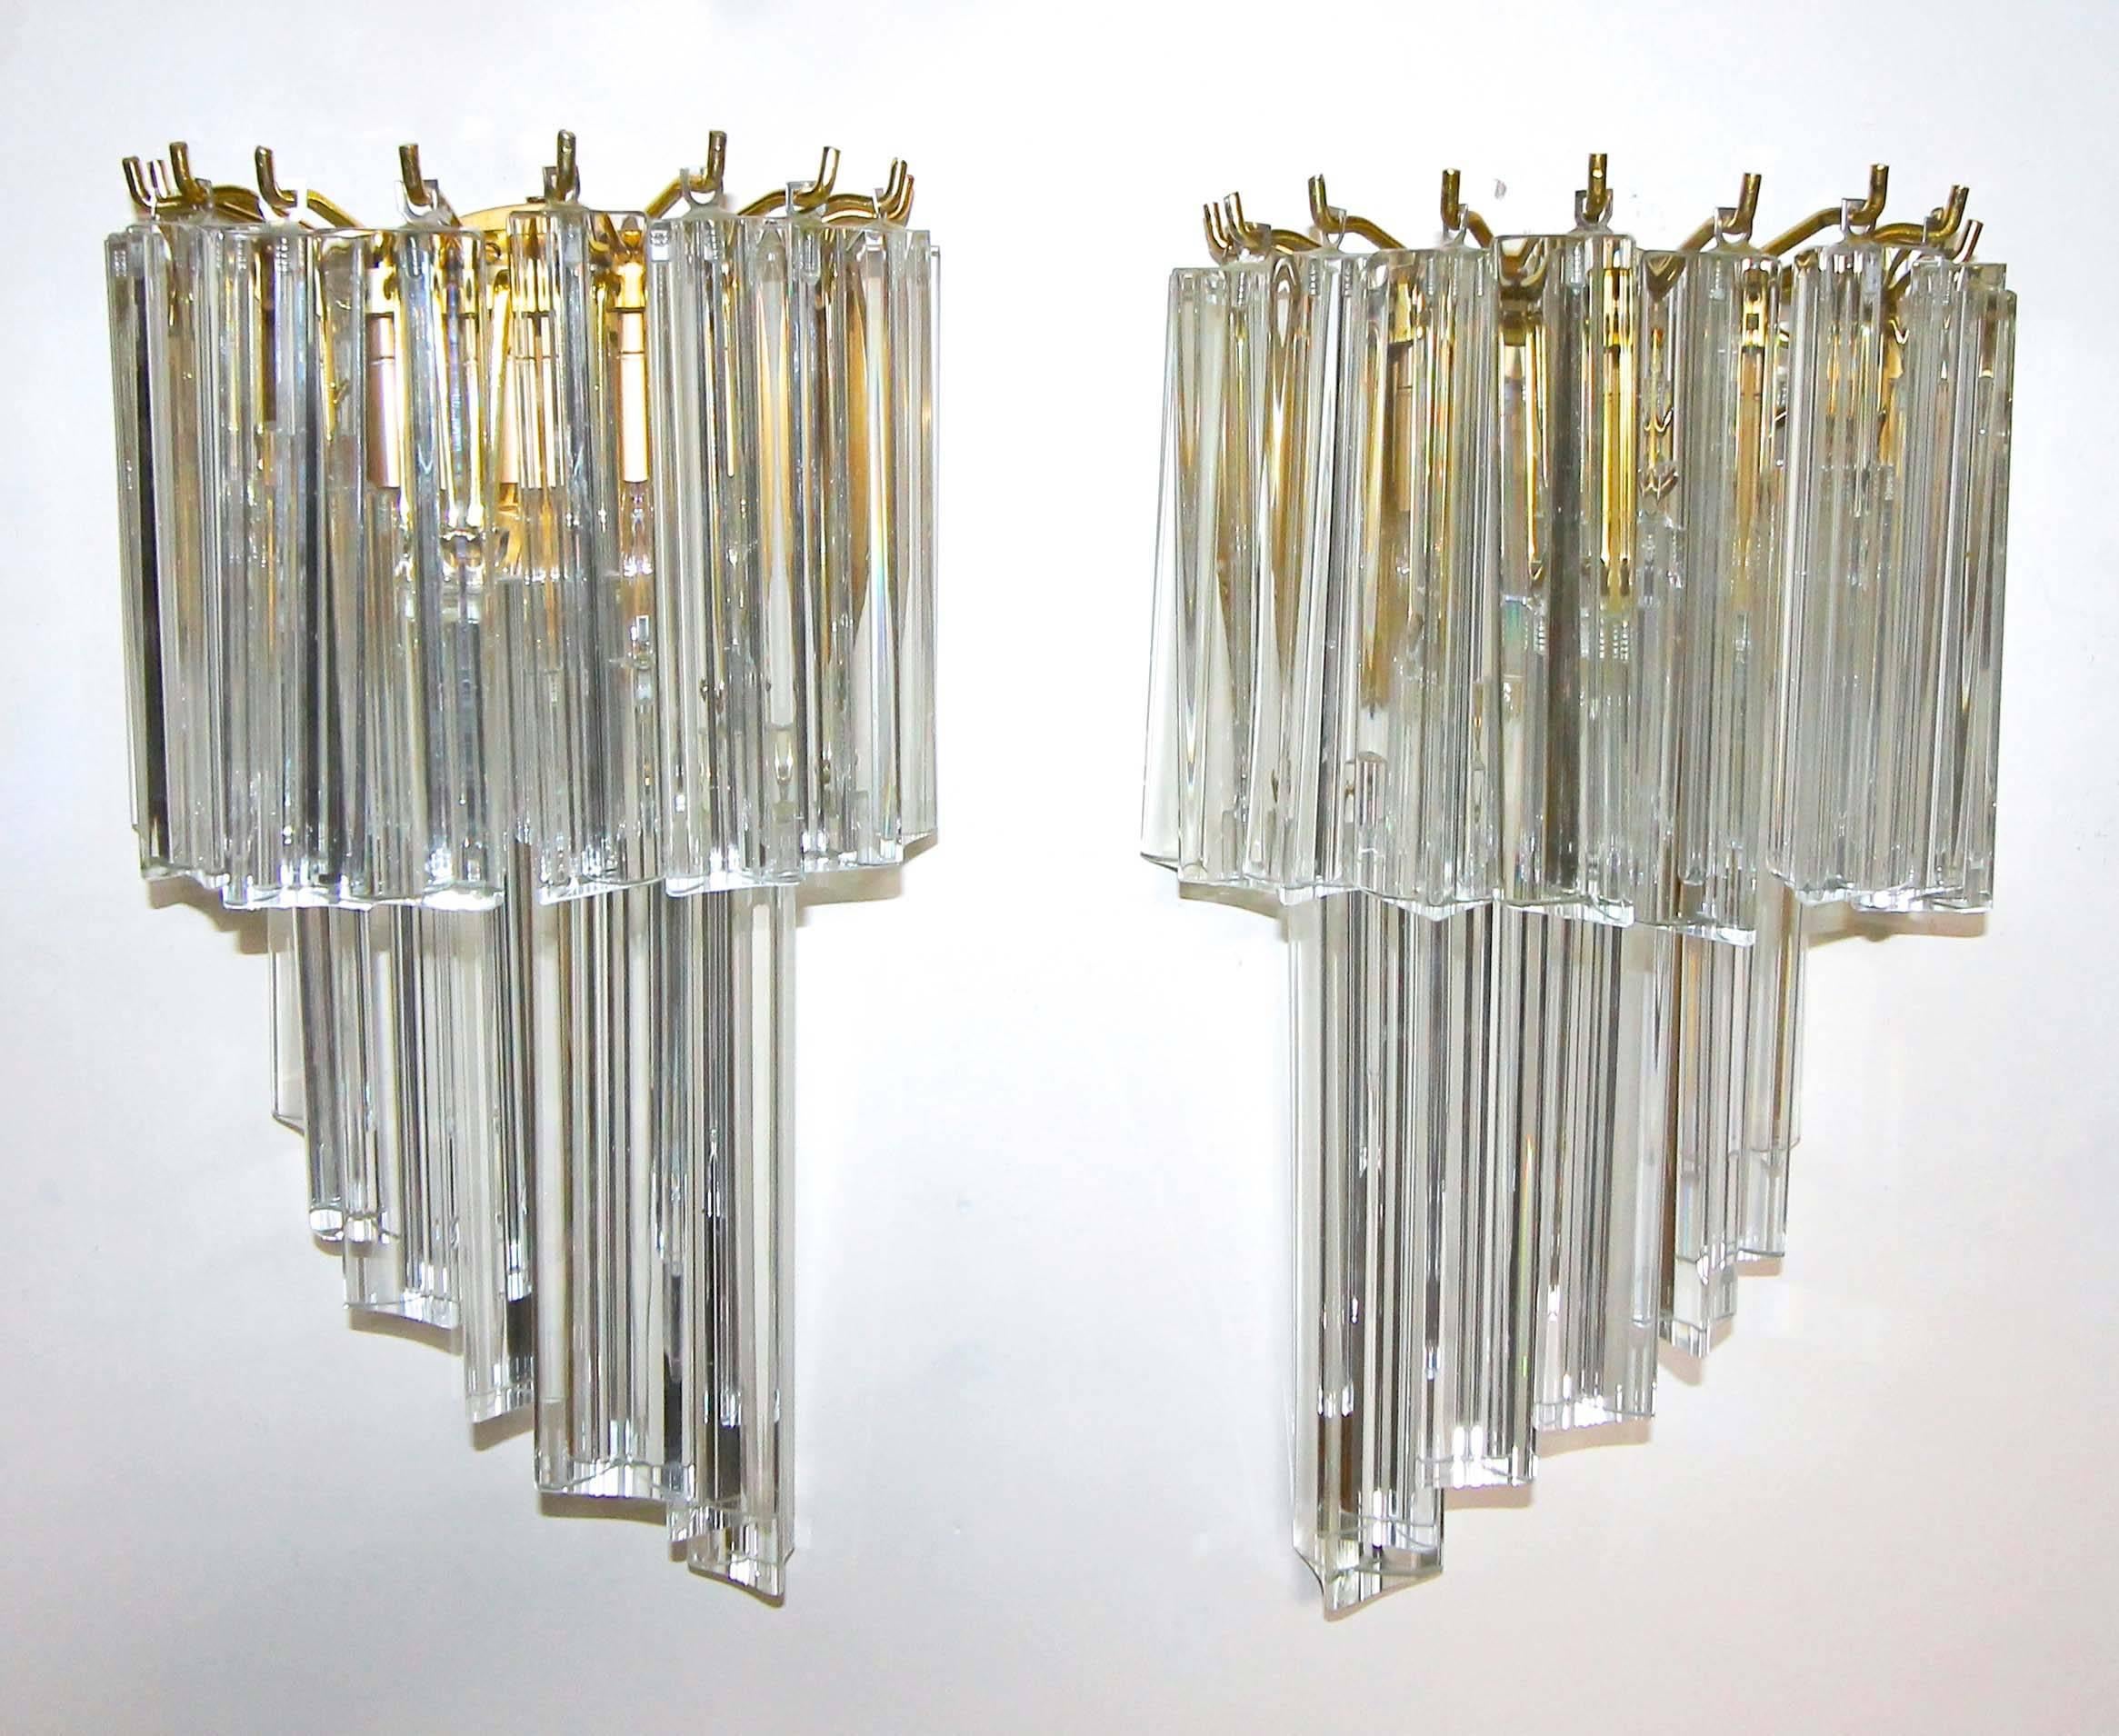 Pair of clear crystal glass triedi or triedri prism wall sconces in a cascading shape in the style of Venini. Solid brass backplates in a warm brushed finish with similarly finished fittings. Each sconce uses one candelabra 